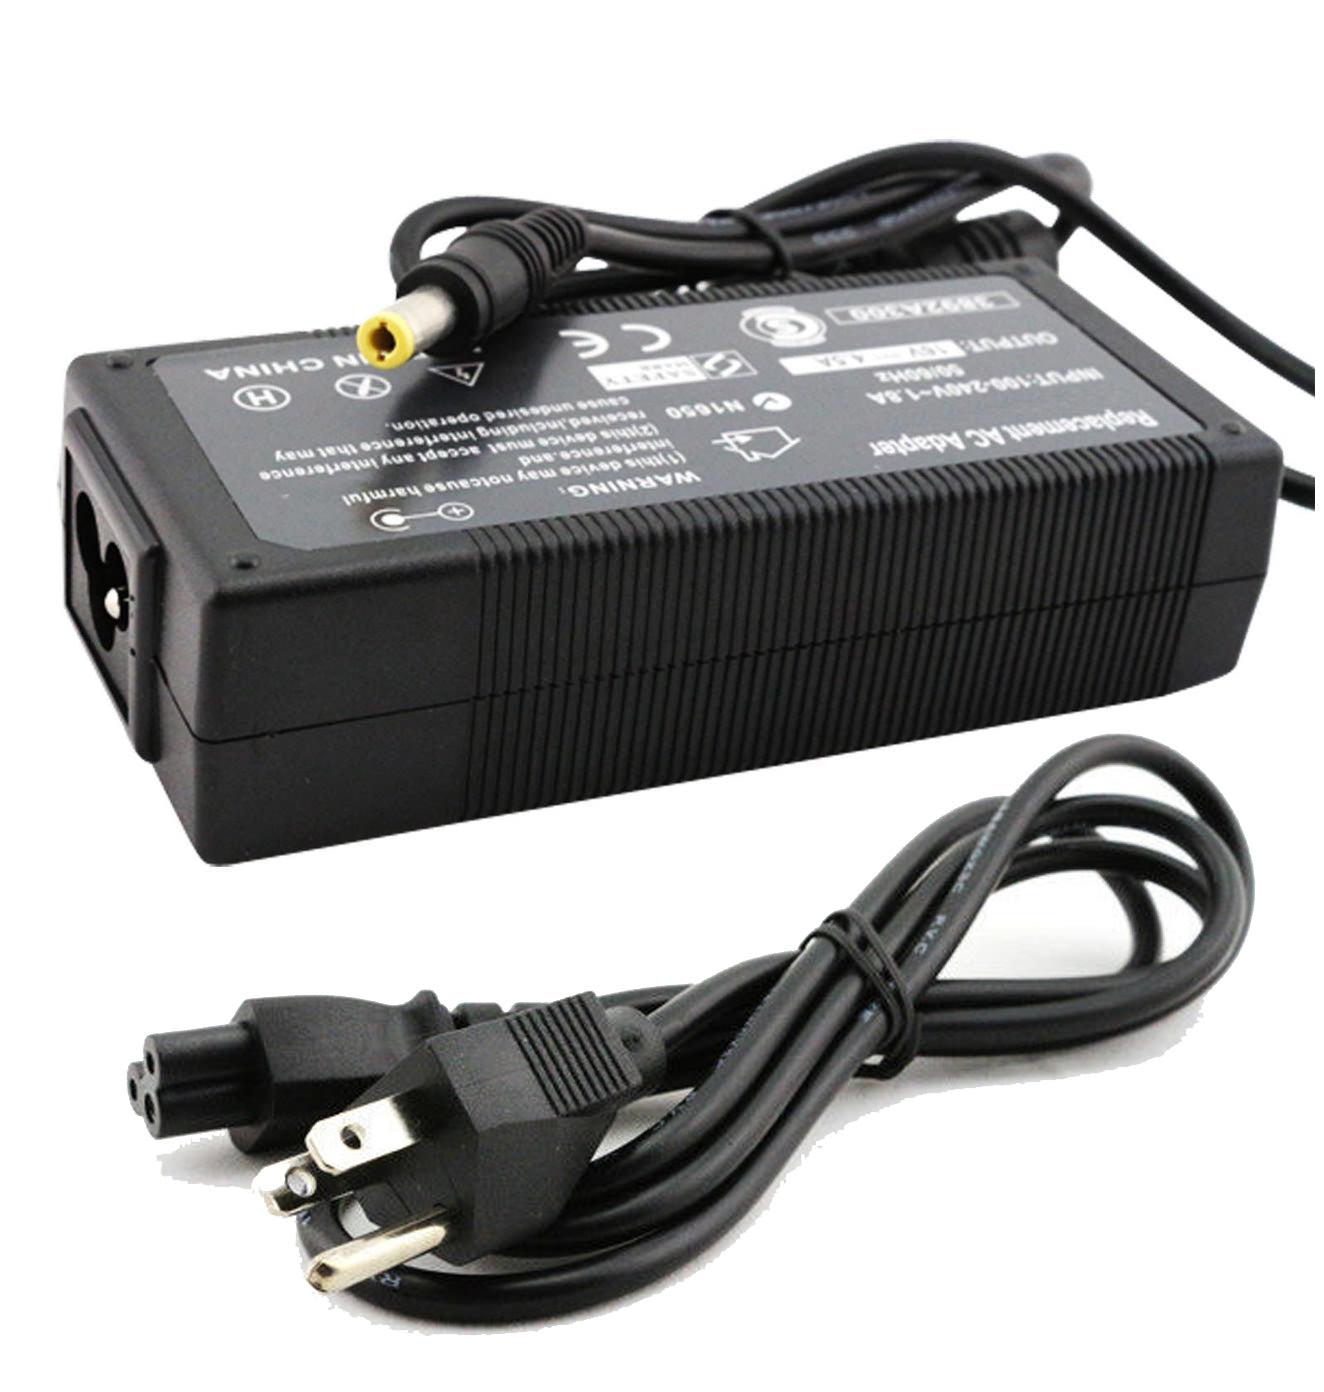 AC Adapter Charger for Panasonic Toughbook CF-52 Notebook.